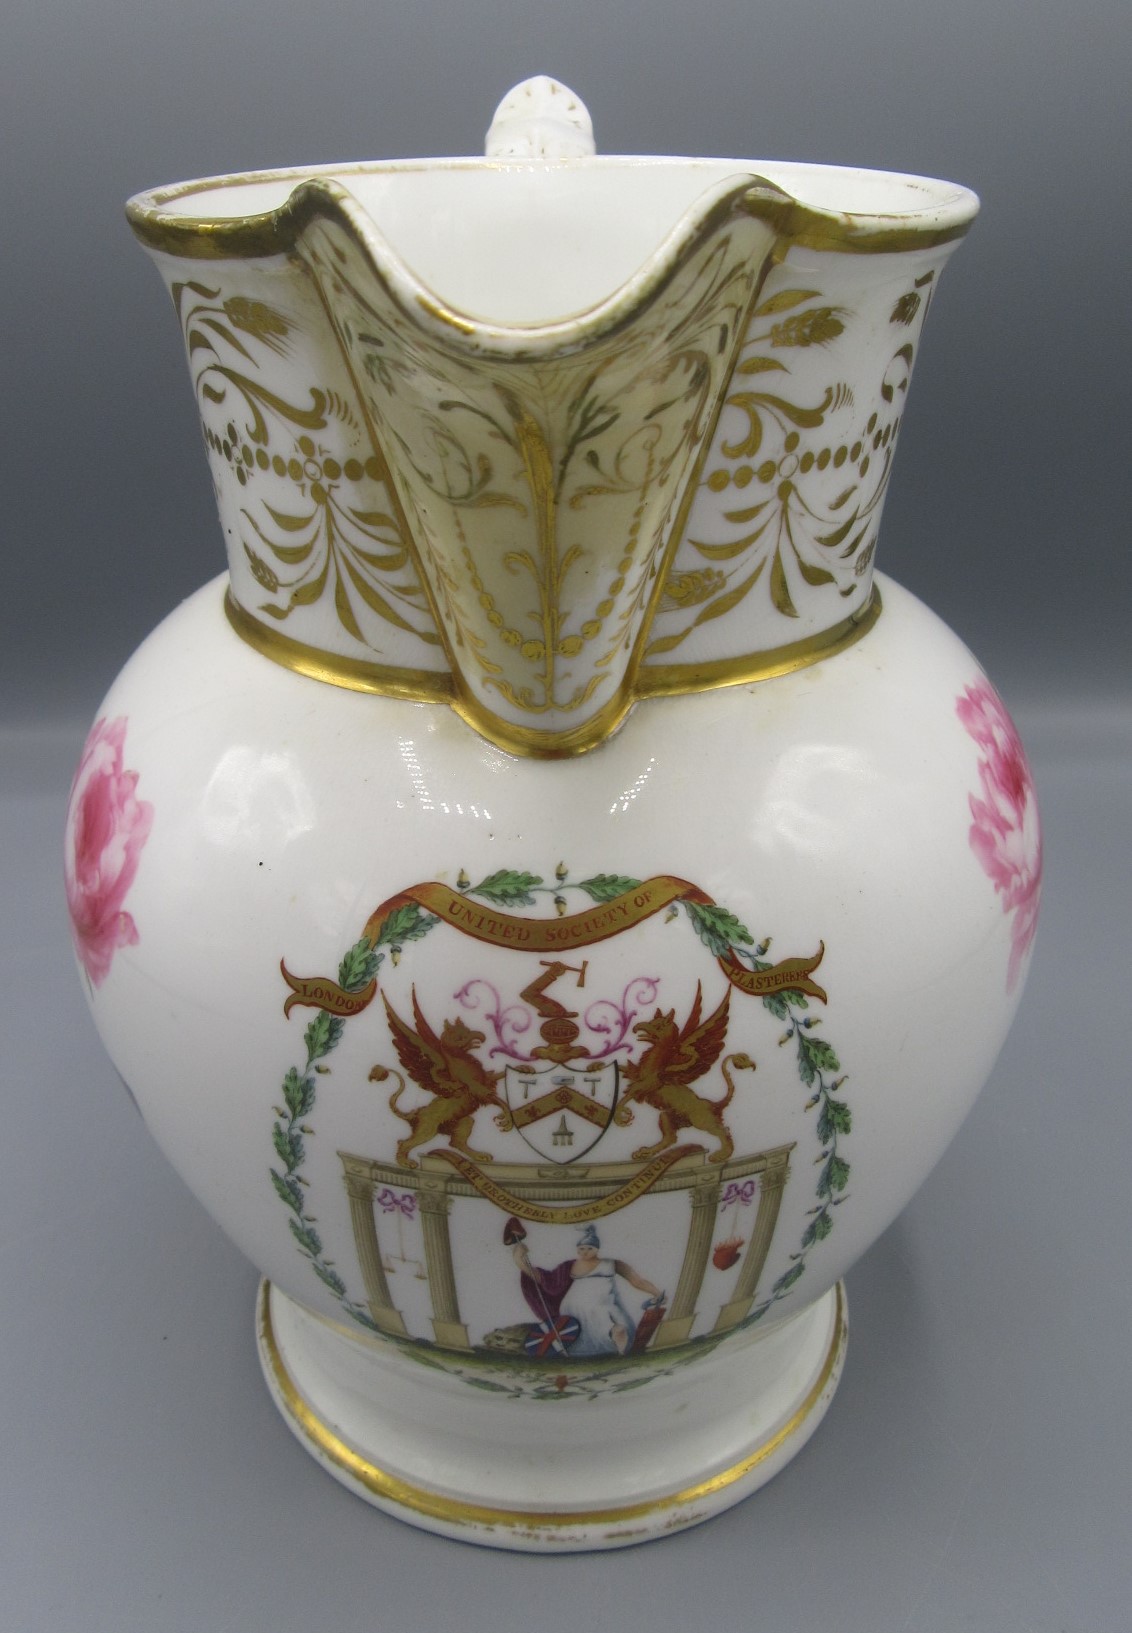 An English porcelain jug, late 18th/early 19th century, inscribed 'United Society of Plasterers,